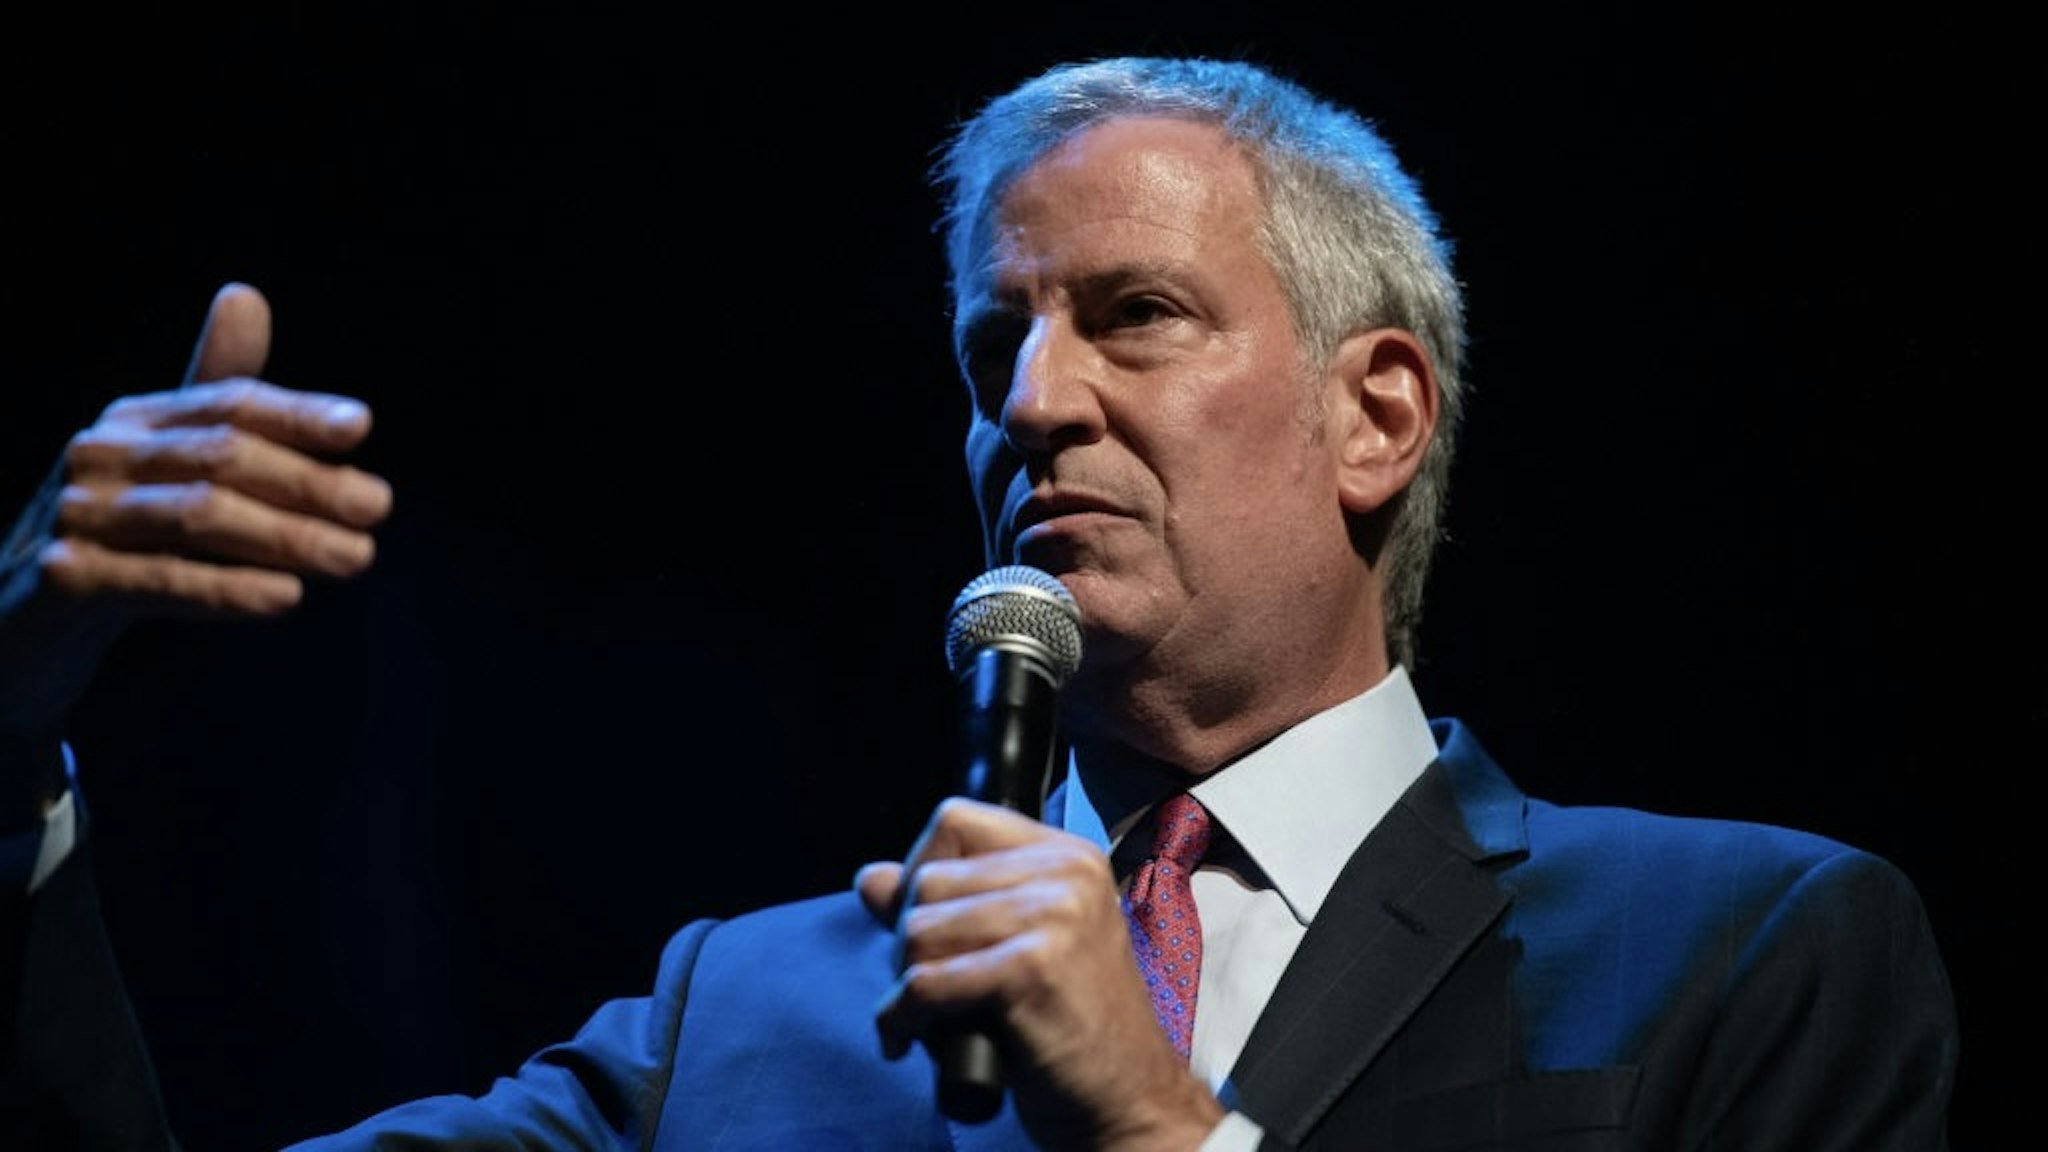 Harlem Music Festival Presents "Uptown Saturday Nite" NEW YORK, NEW YORK - AUGUST 28: New York City Mayor Bill de Blasio speaks during Uptown Saturday Nite at the Apollo Theater on August 28, 2021 in New York City. (Photo by Shahar Azran/Getty Images) Shahar Azran / Contributor